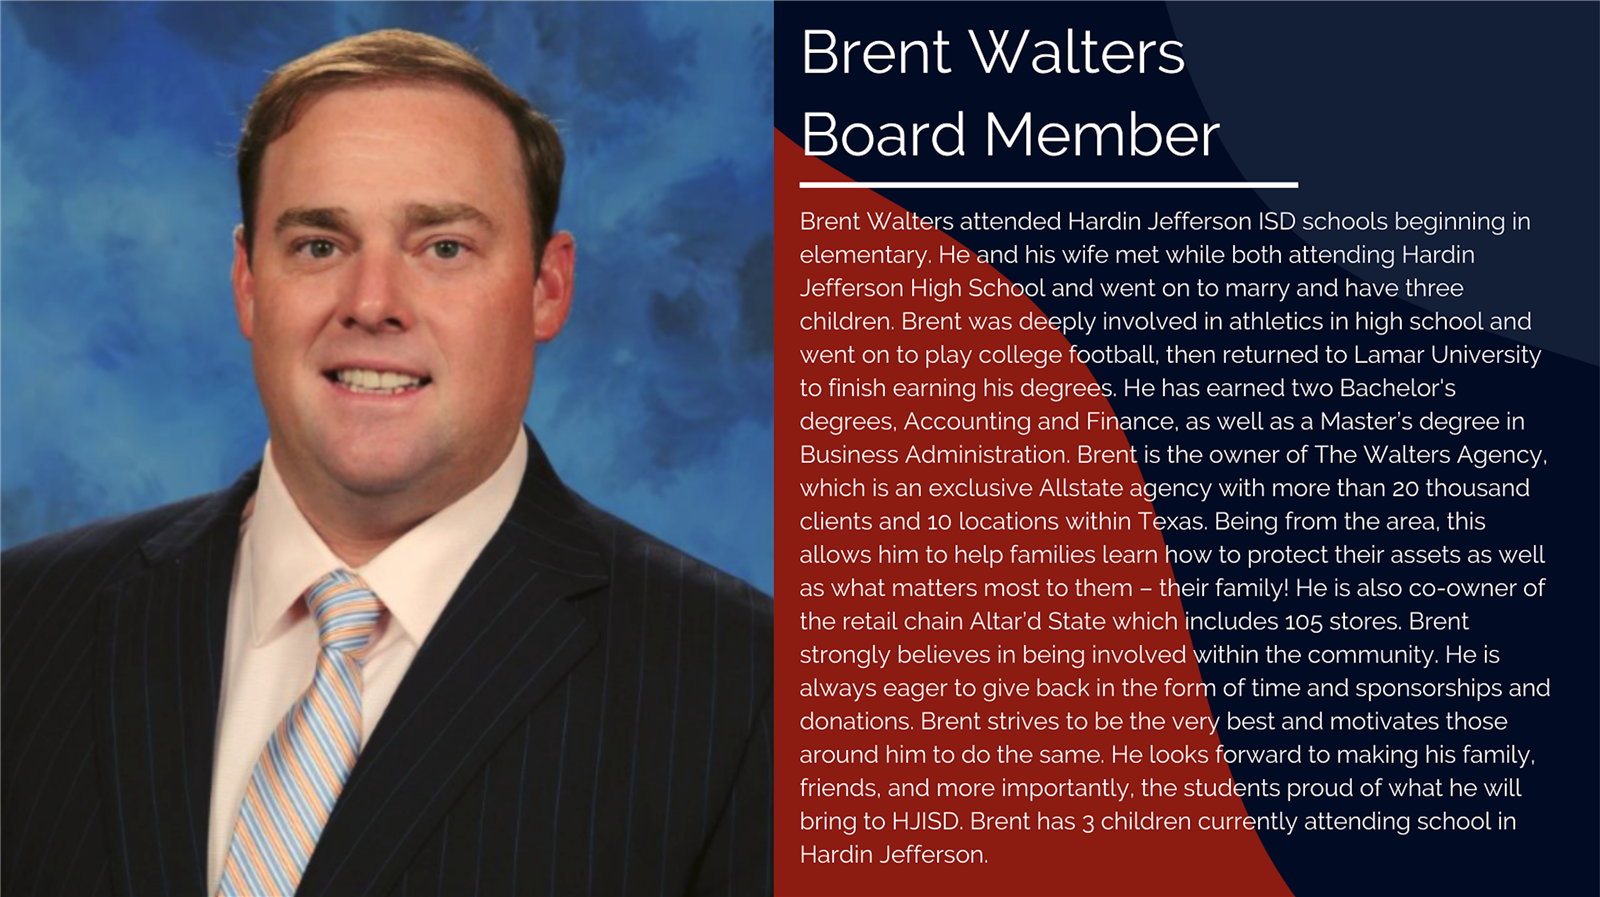 Brent Walters attended Hardin Jefferson ISD schools beginning in elementary. He and his wife met while both attending Hardin  